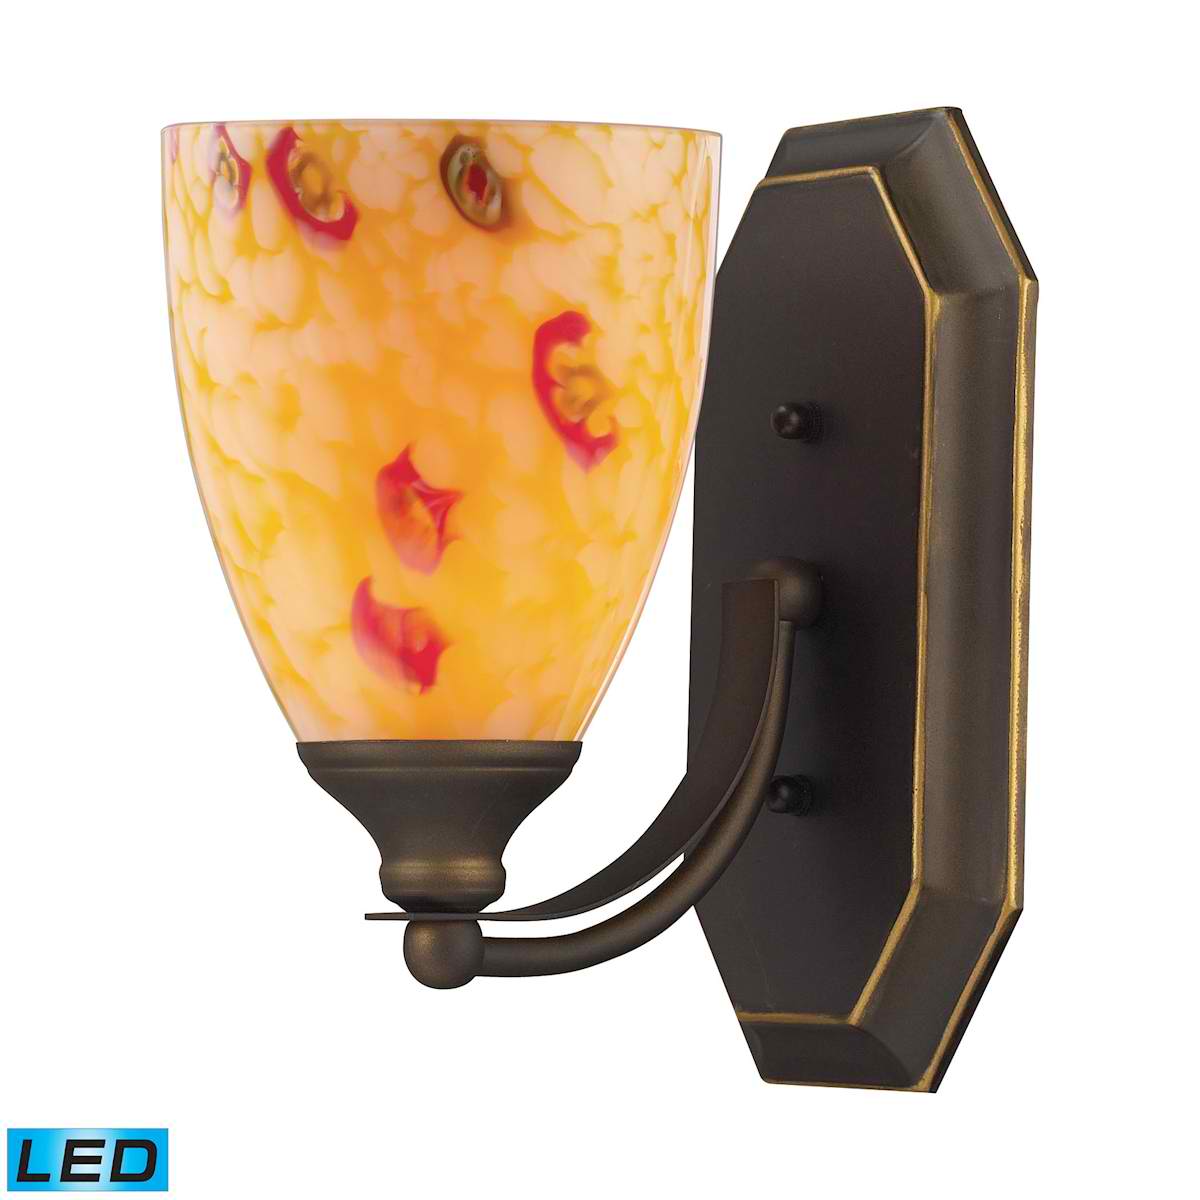 1 Light Vanity in Aged Bronze and Yellow Blaze Glass - LED Offering Up To 800 Lumens (60 Watt Equivalent)